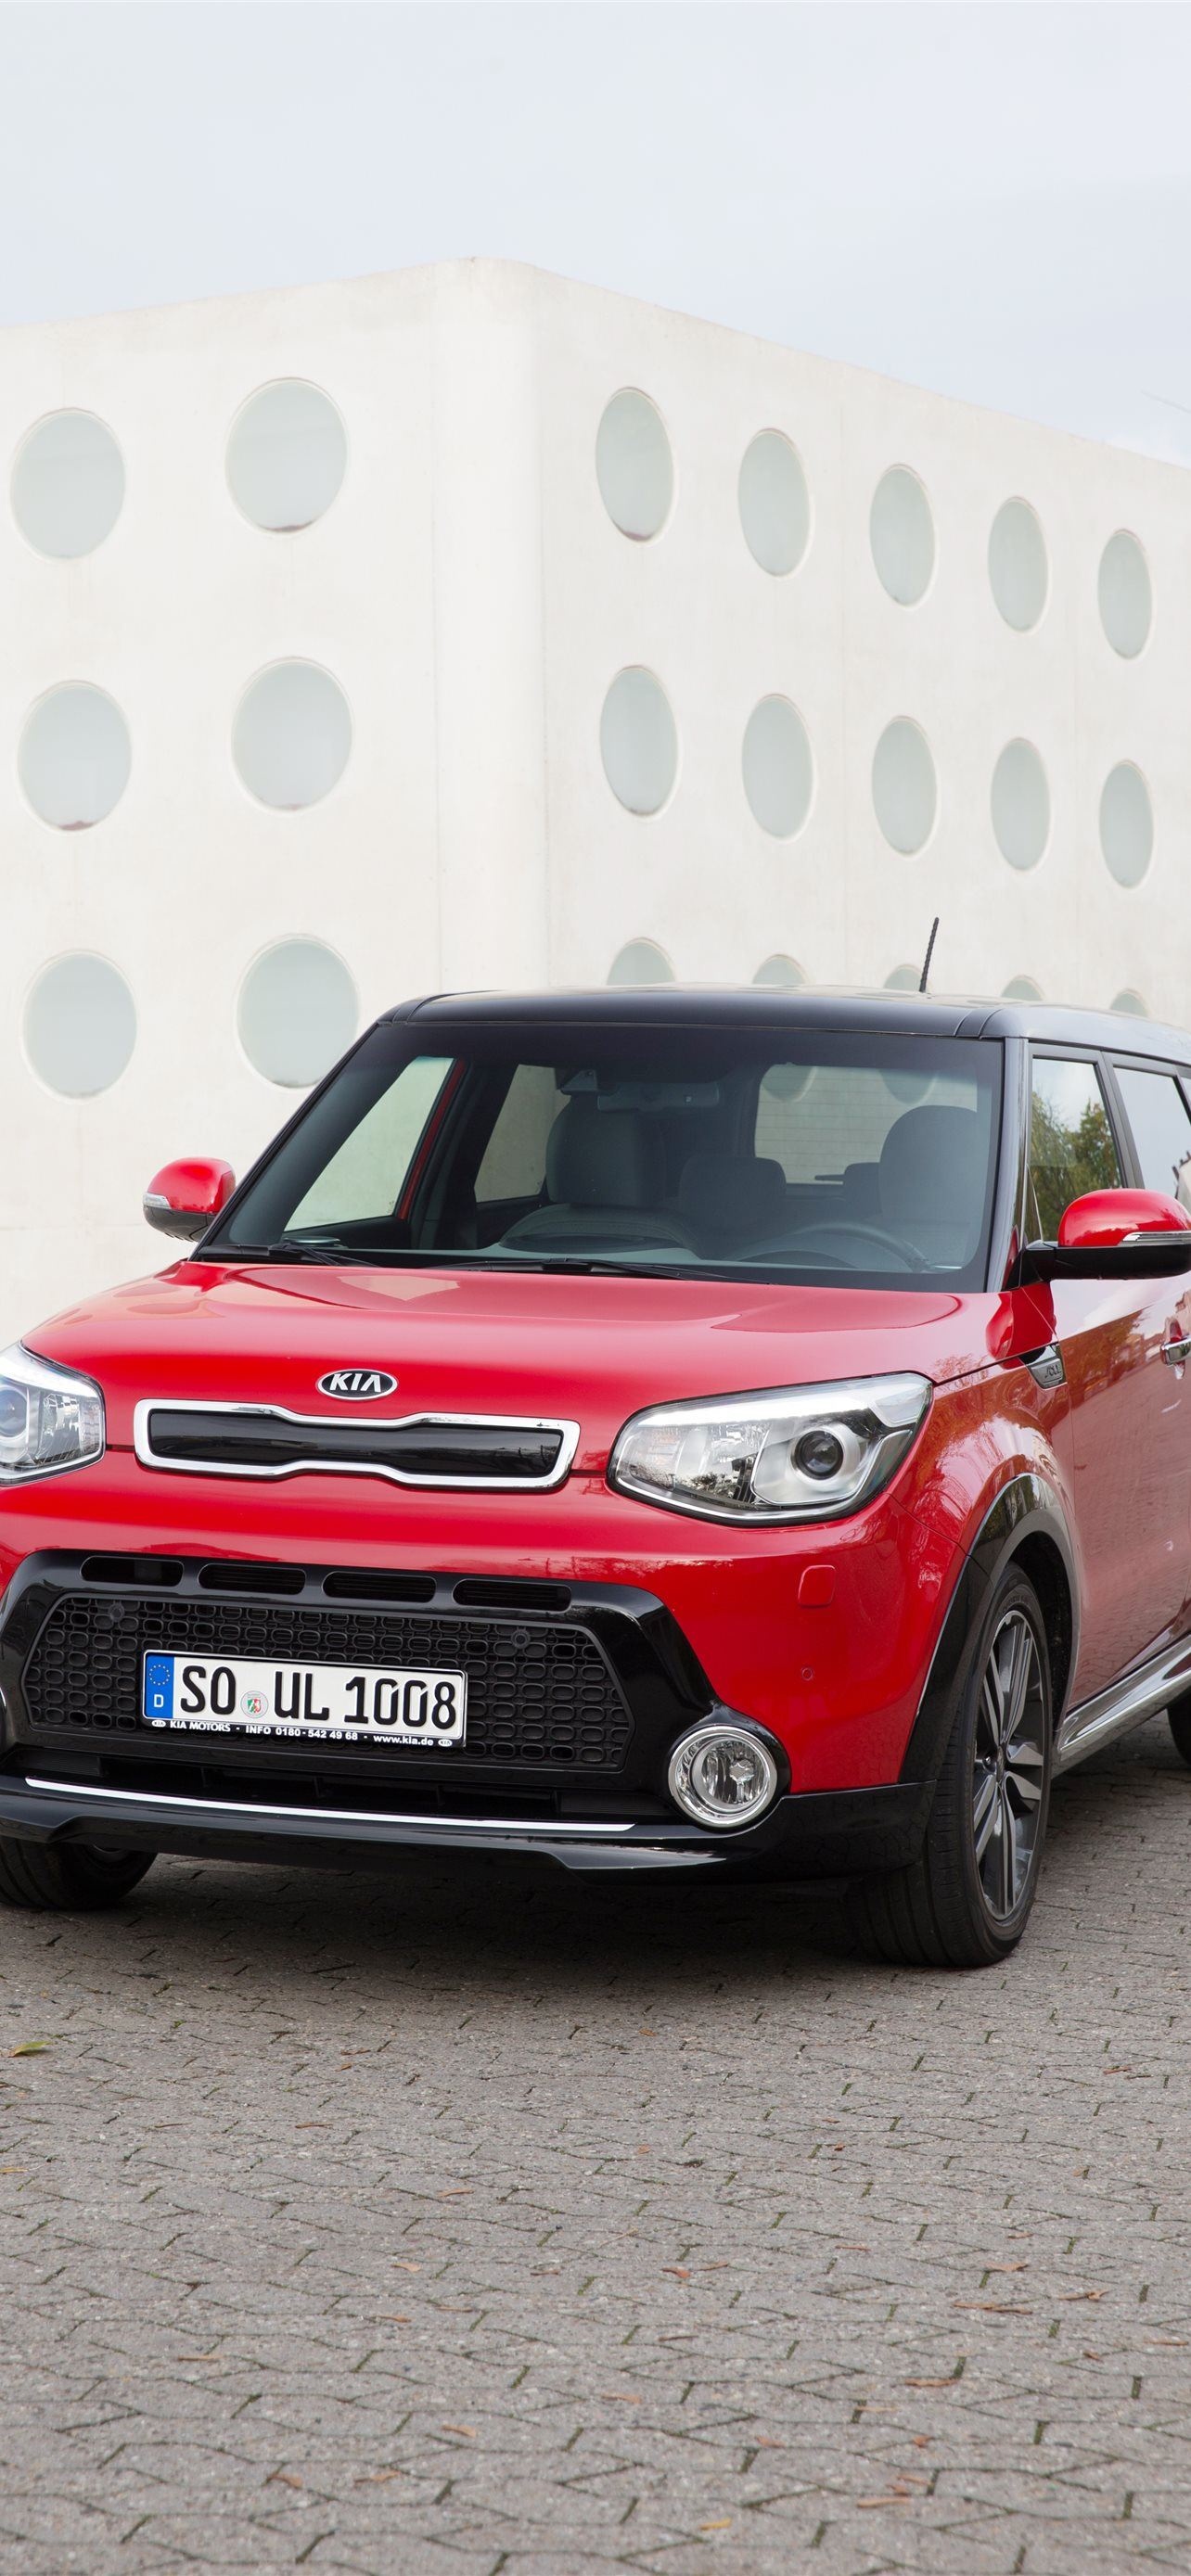 Kia Soul, iPhone wallpapers, Best quality, High definition, 1290x2780 HD Handy